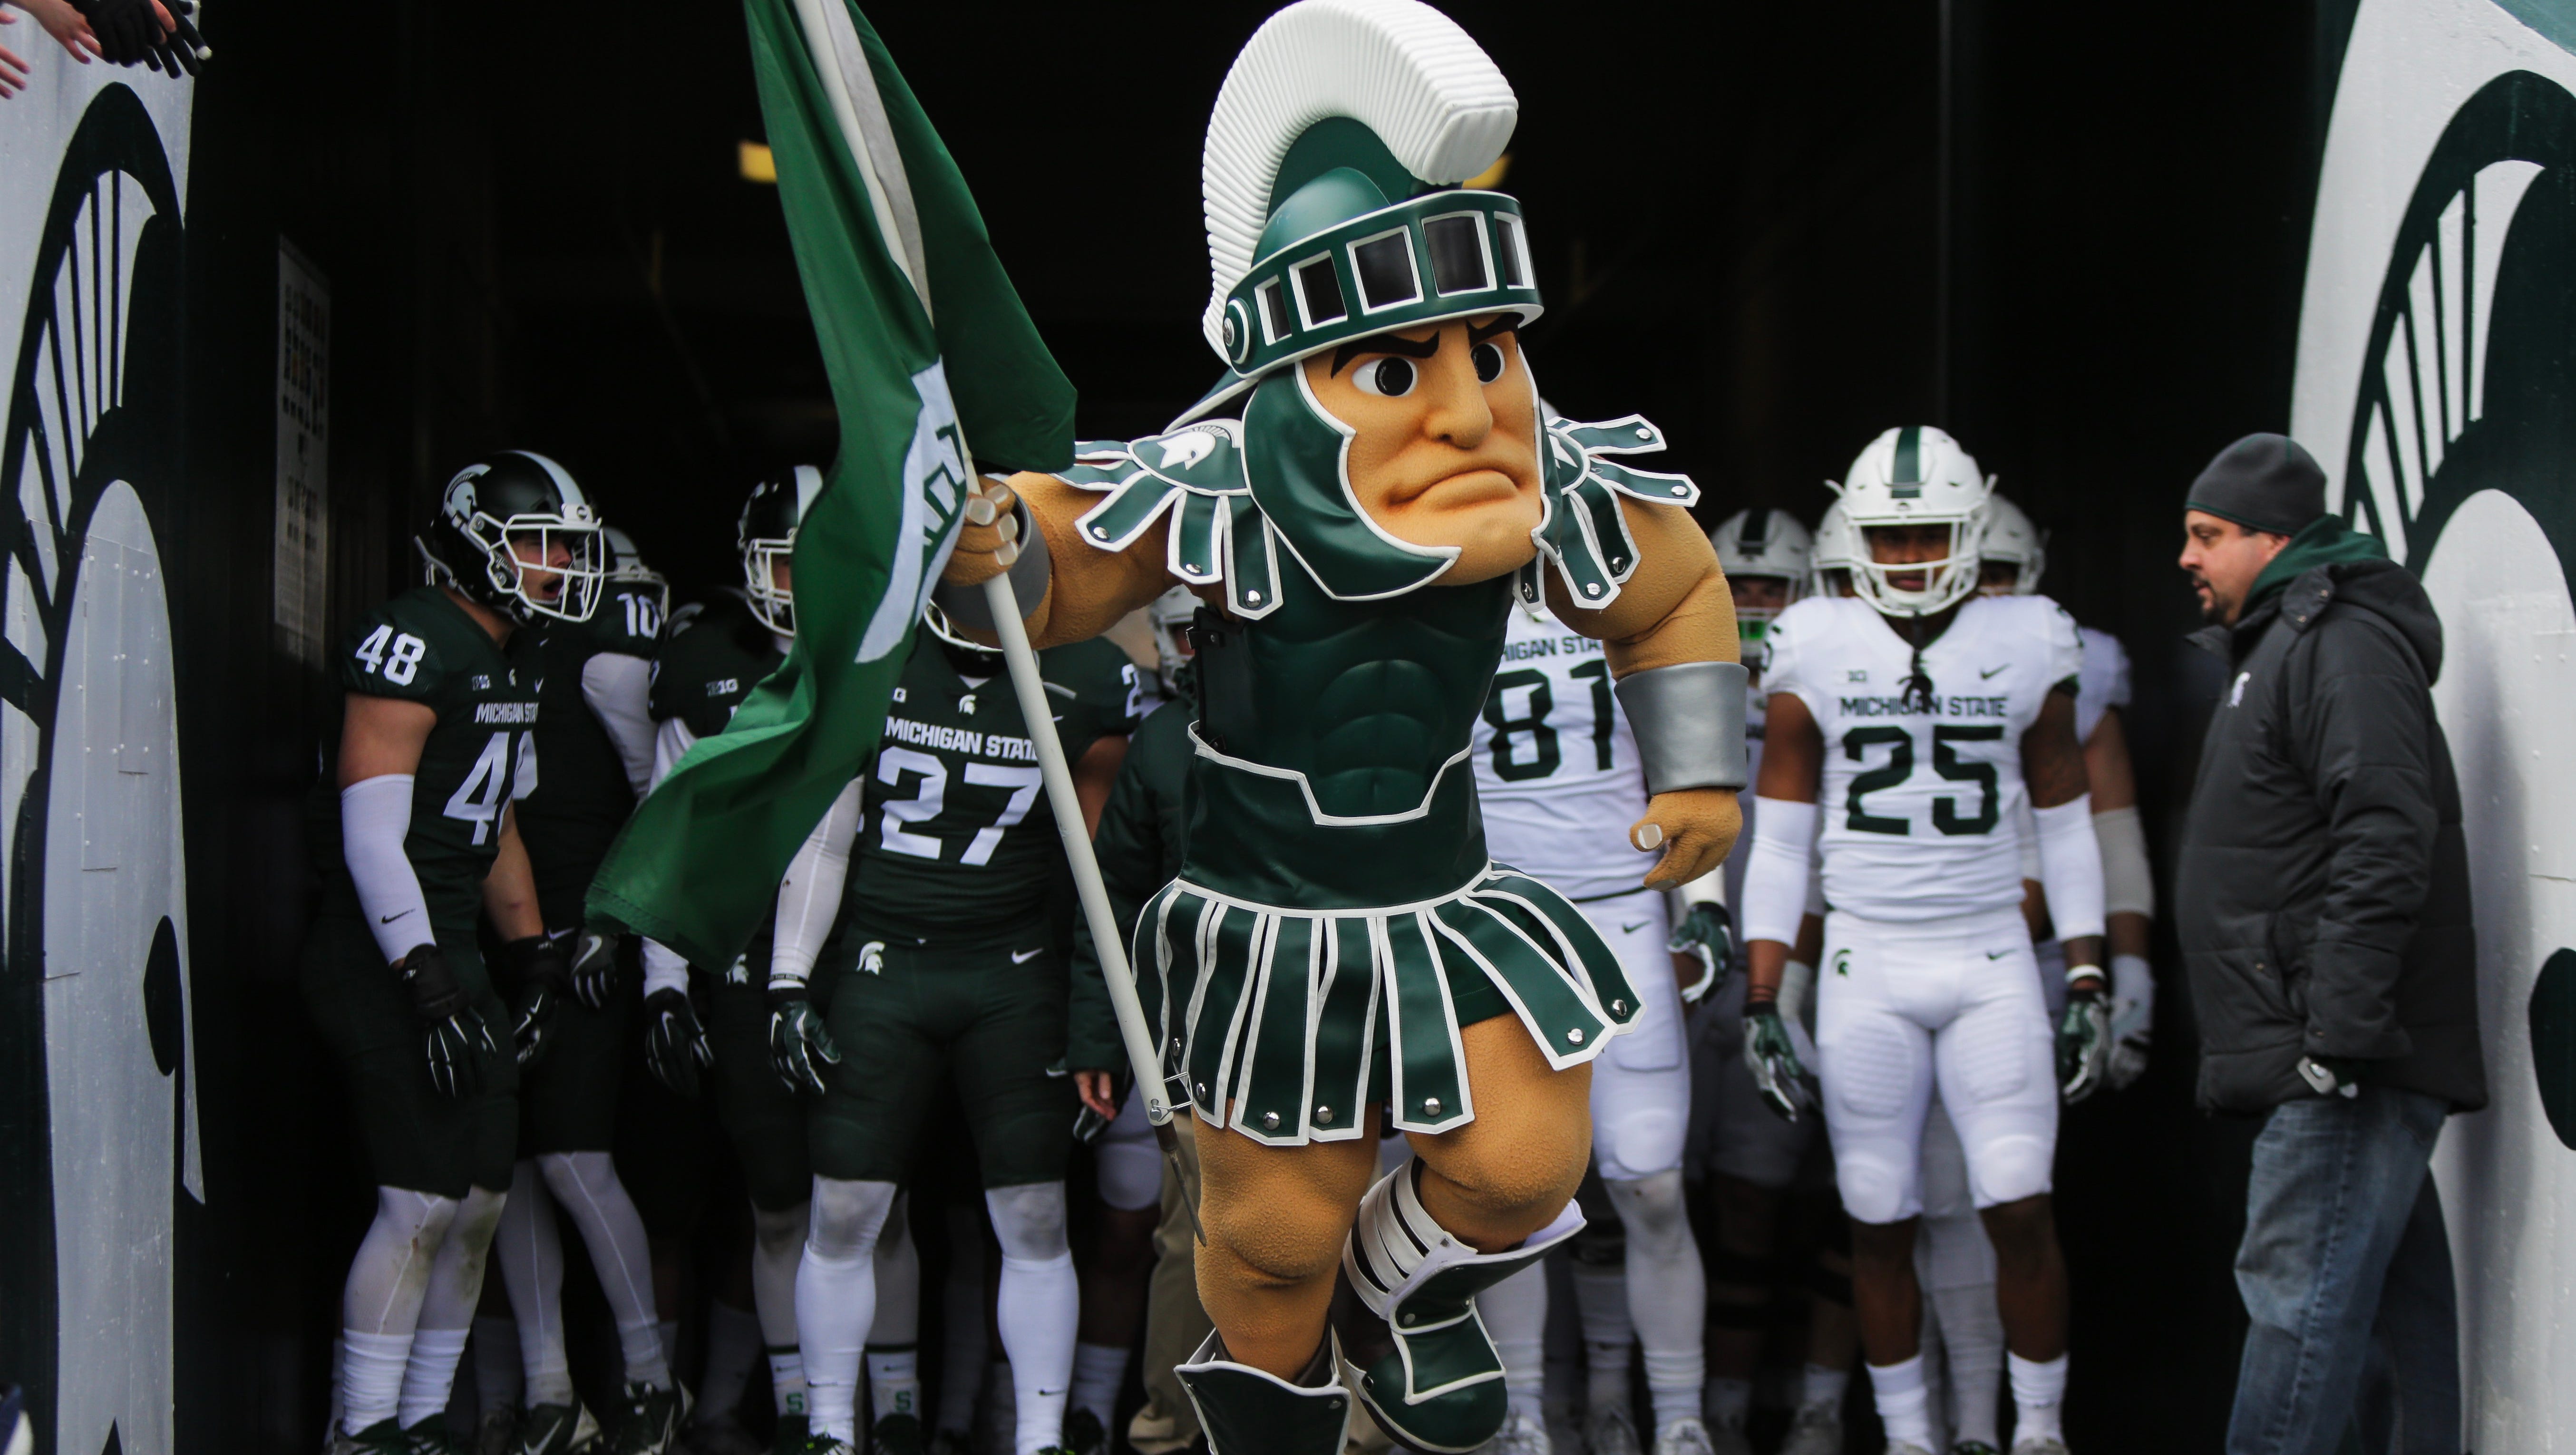 Sparty The History Behind Msu S Mascot